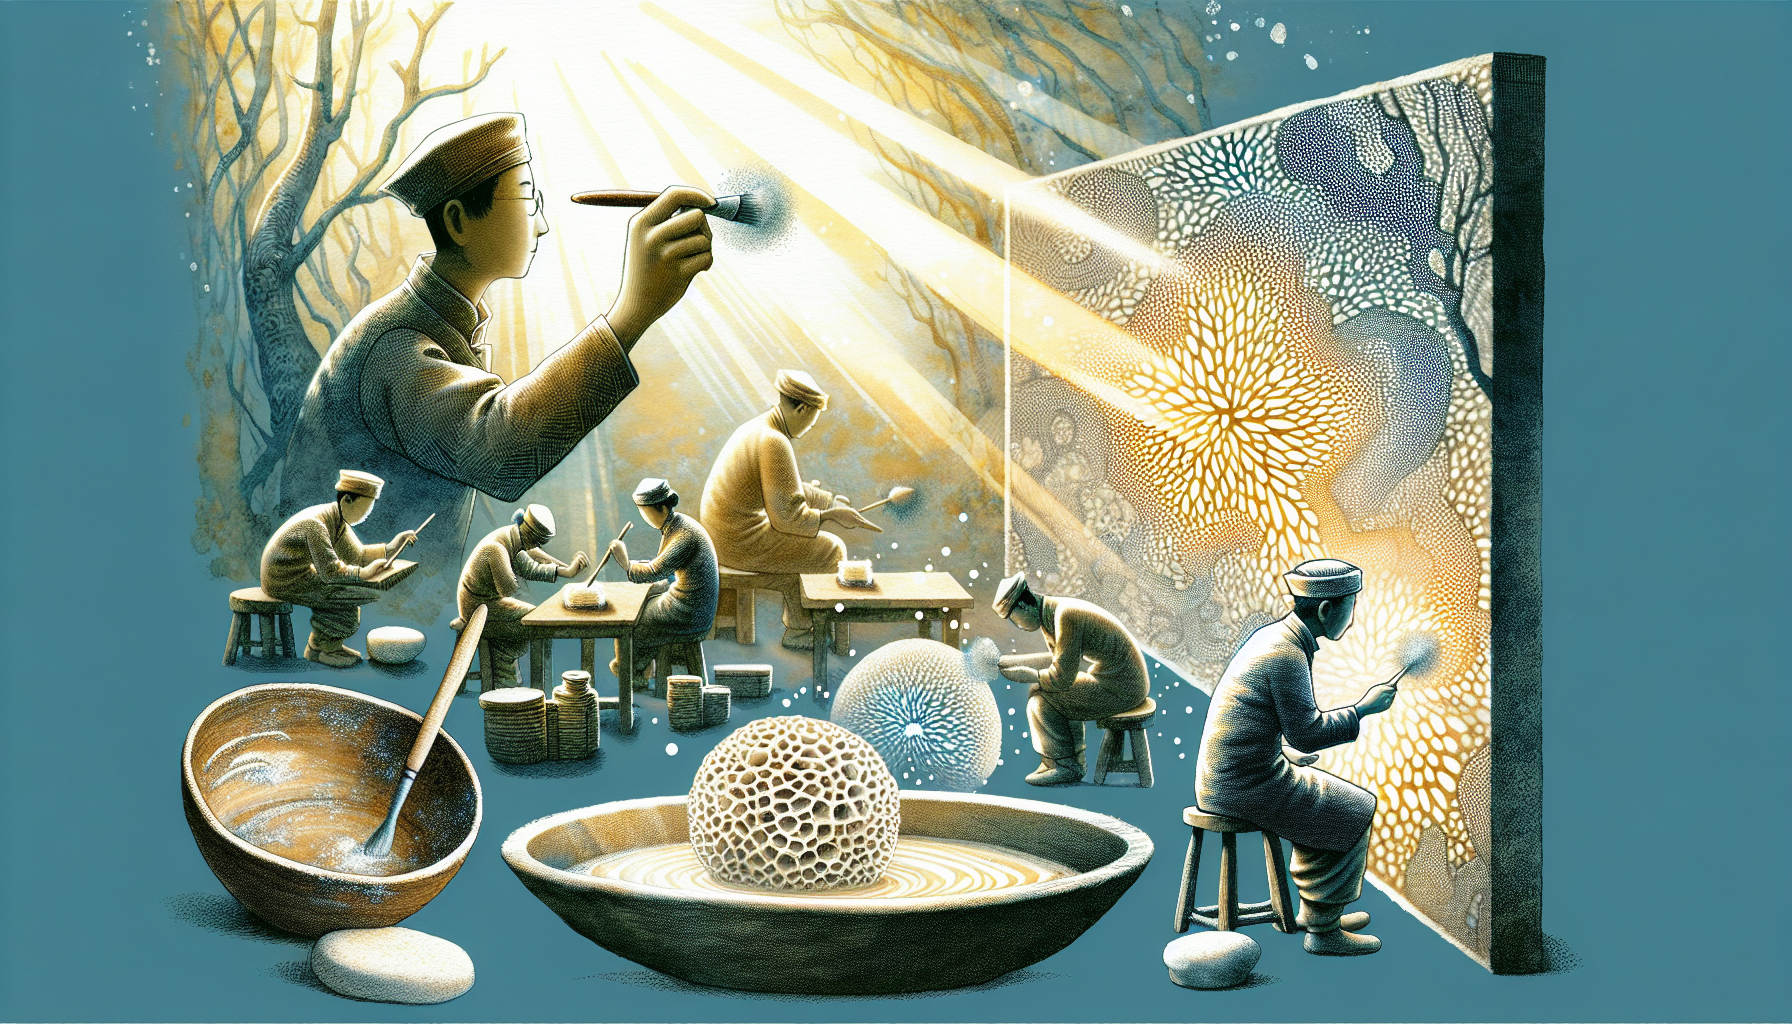 Sea Sponge Wholesale | Artistic illustration of sea sponges being used in a painting